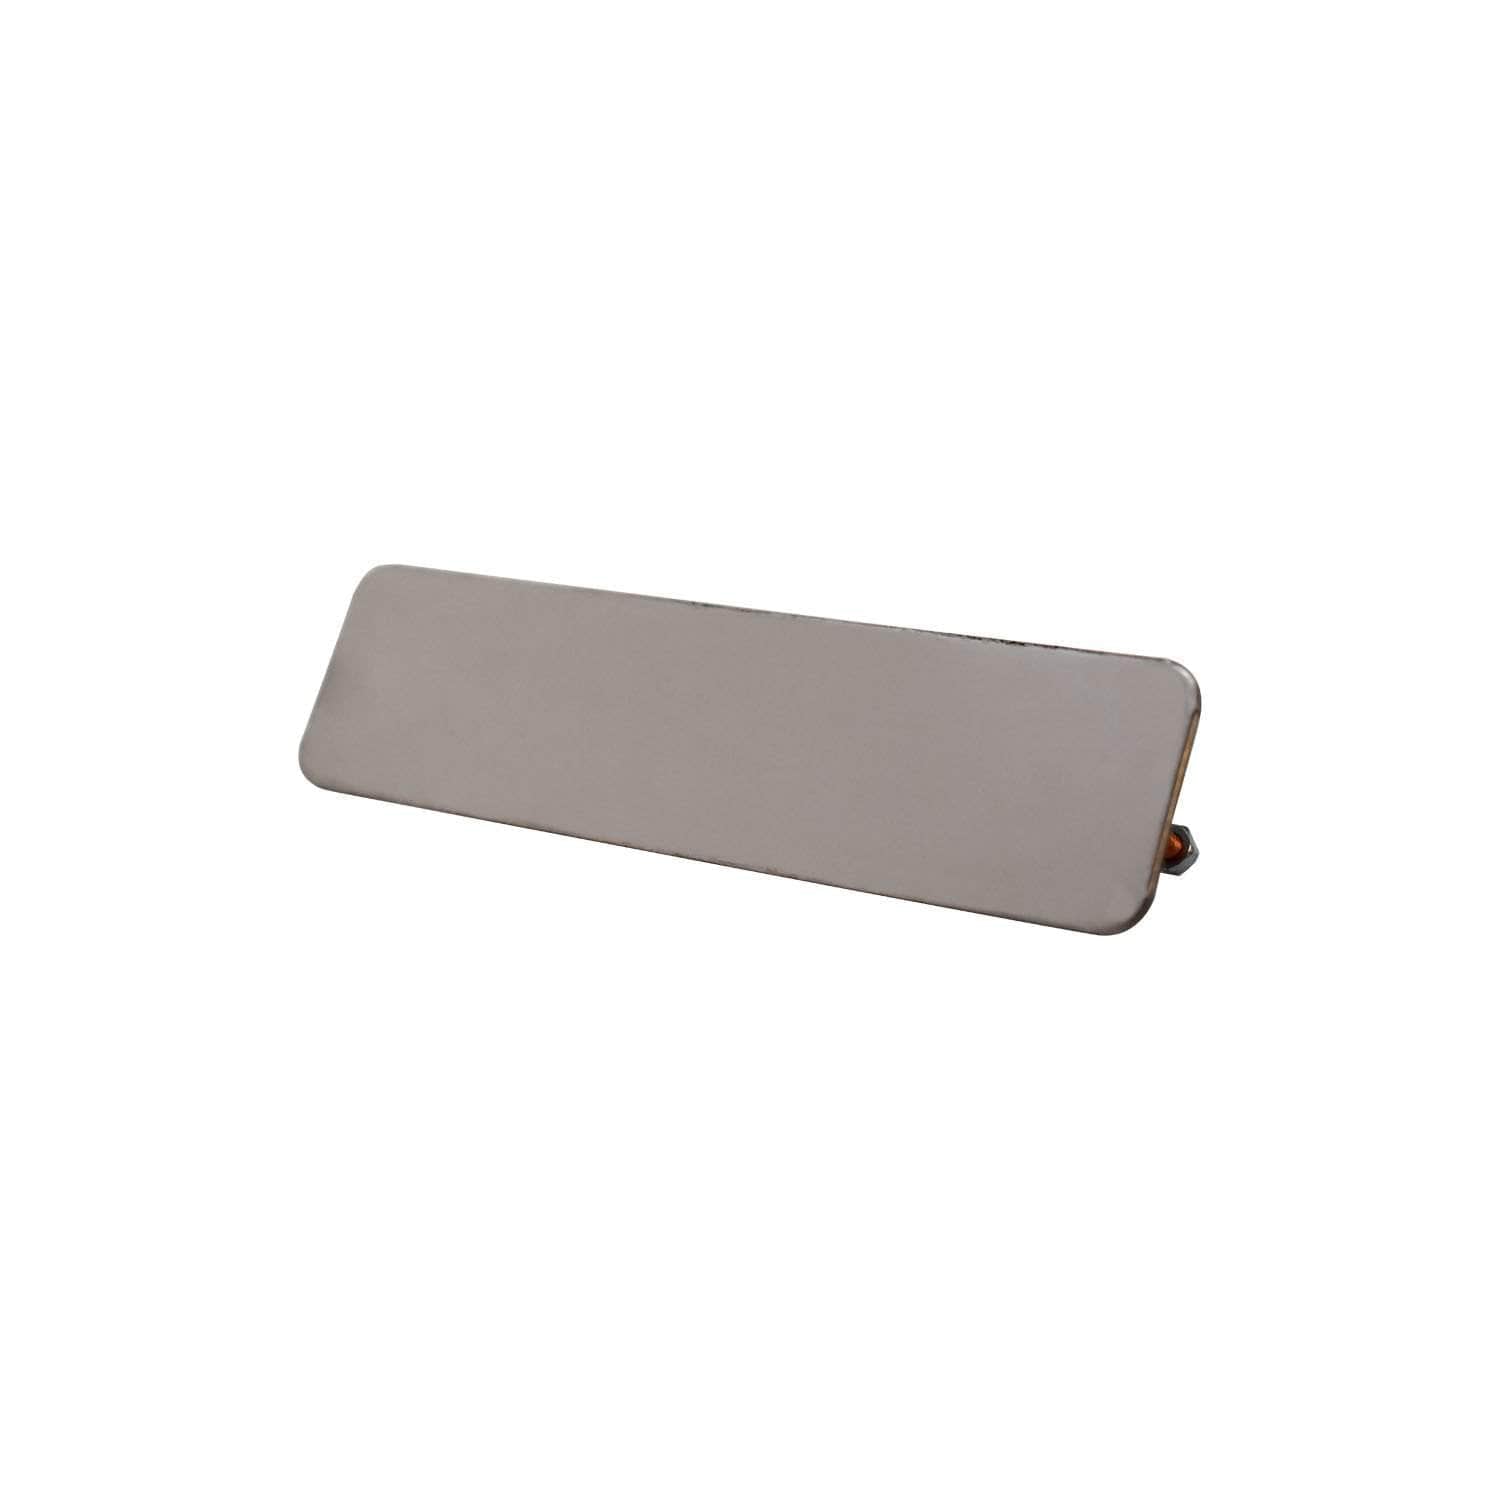 Air Wheel Blank Plate for use with 'Deluxe' Aga range cooker